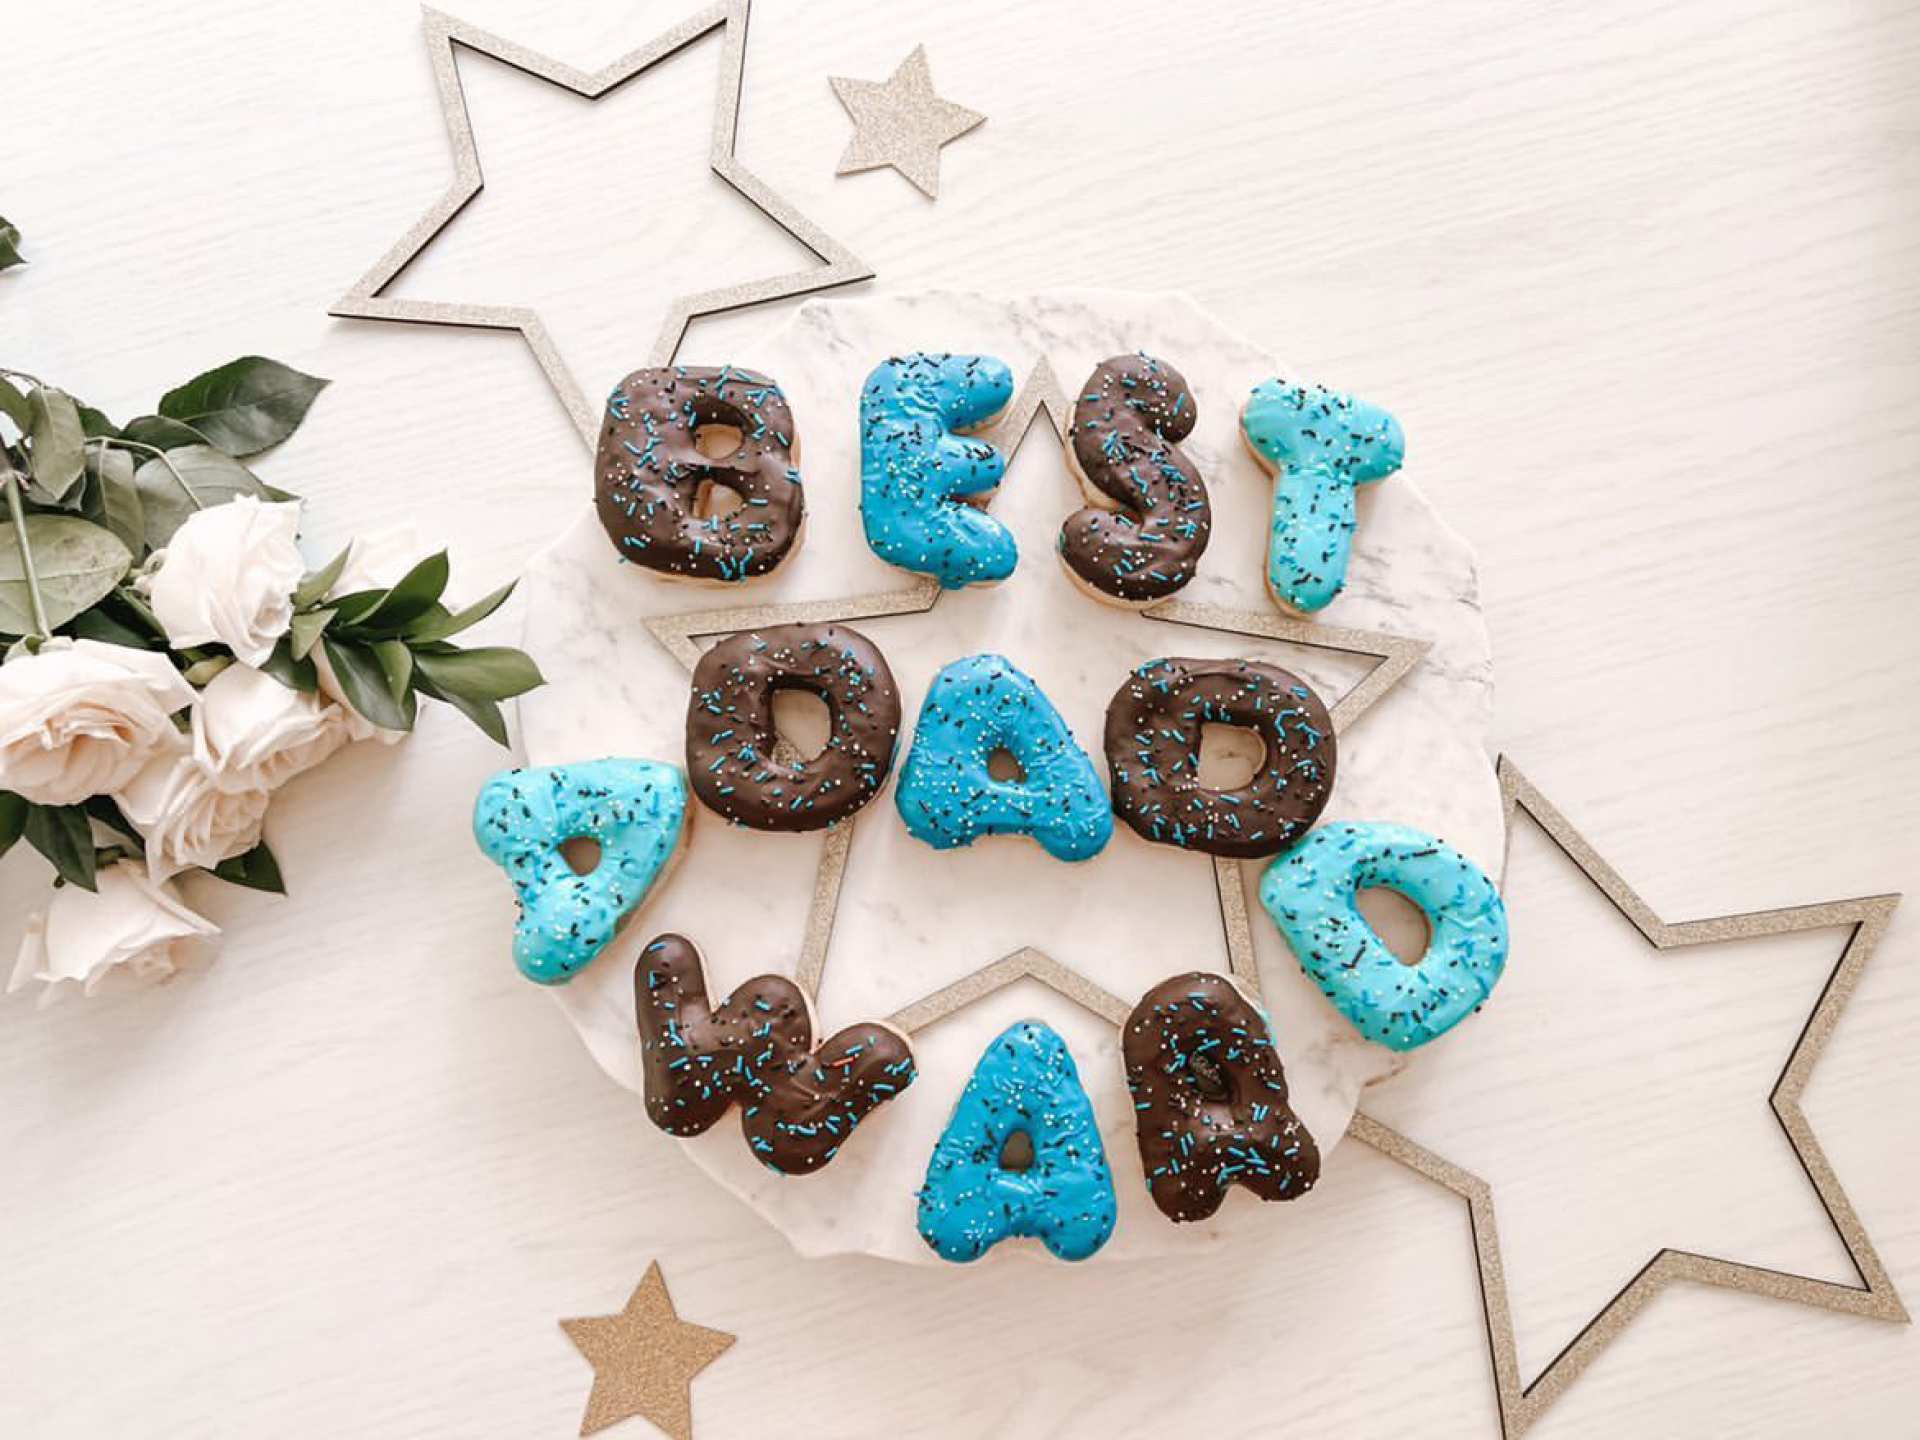 Best doughnuts in Toronto | Best Dad Award doughnuts from Letterbox Doughnuts